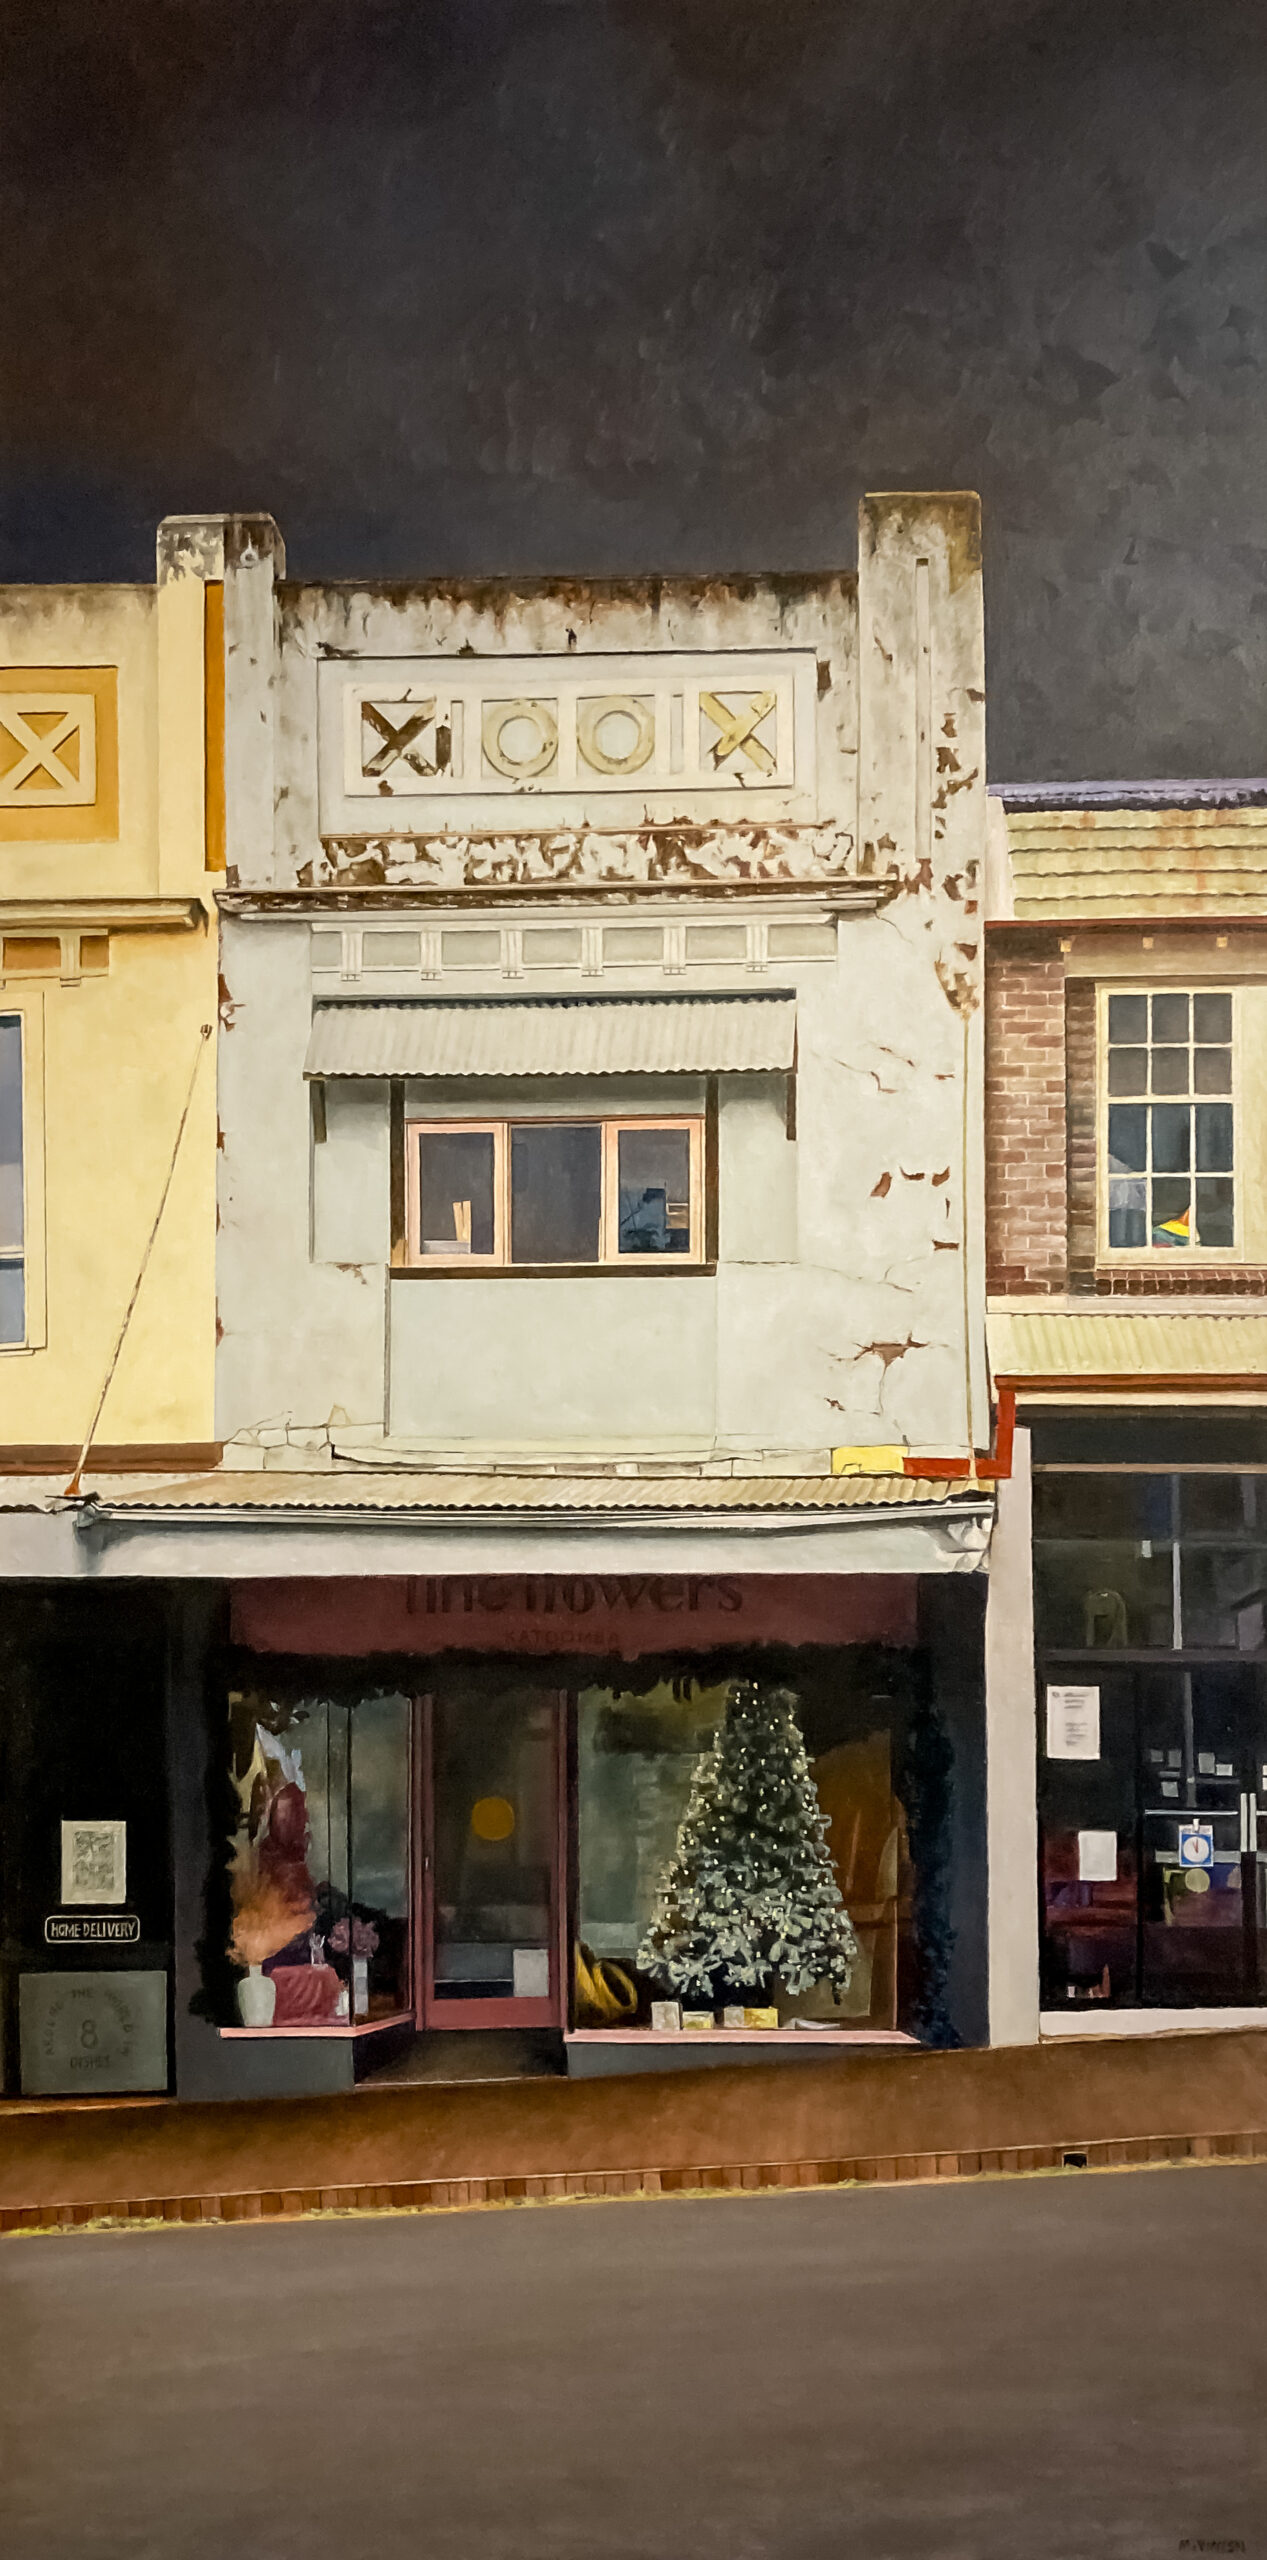 A portrait oriented painting of an old store front with Christmas decorations in the window